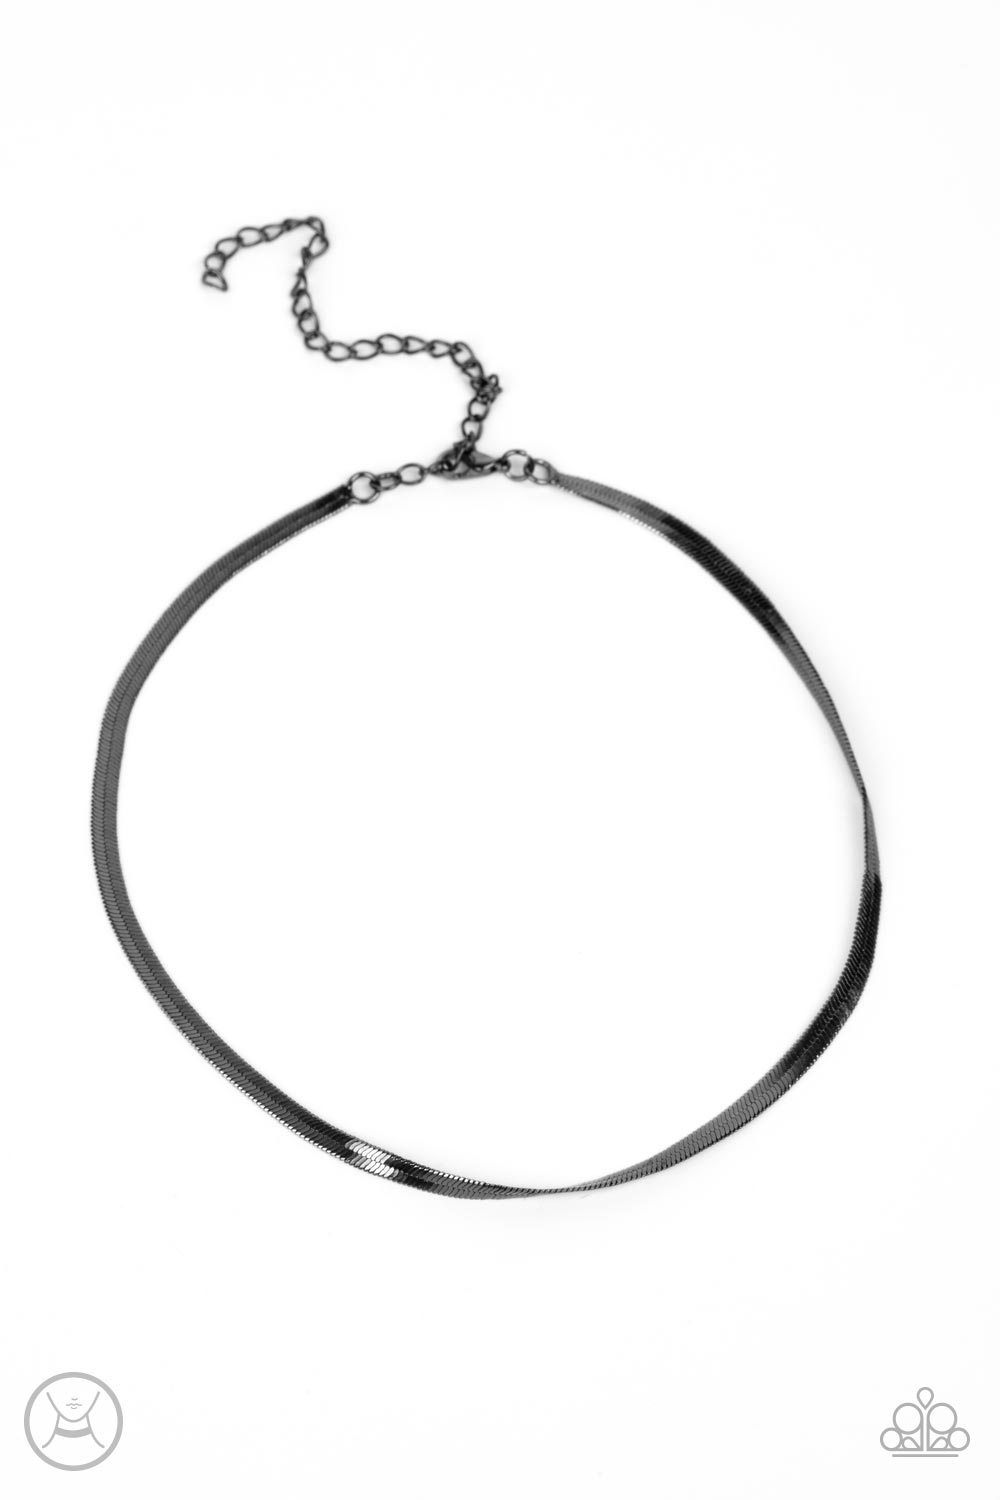 In No Time Flat Gunmetal Black Choker Necklace - Paparazzi Accessories- lightbox - CarasShop.com - $5 Jewelry by Cara Jewels